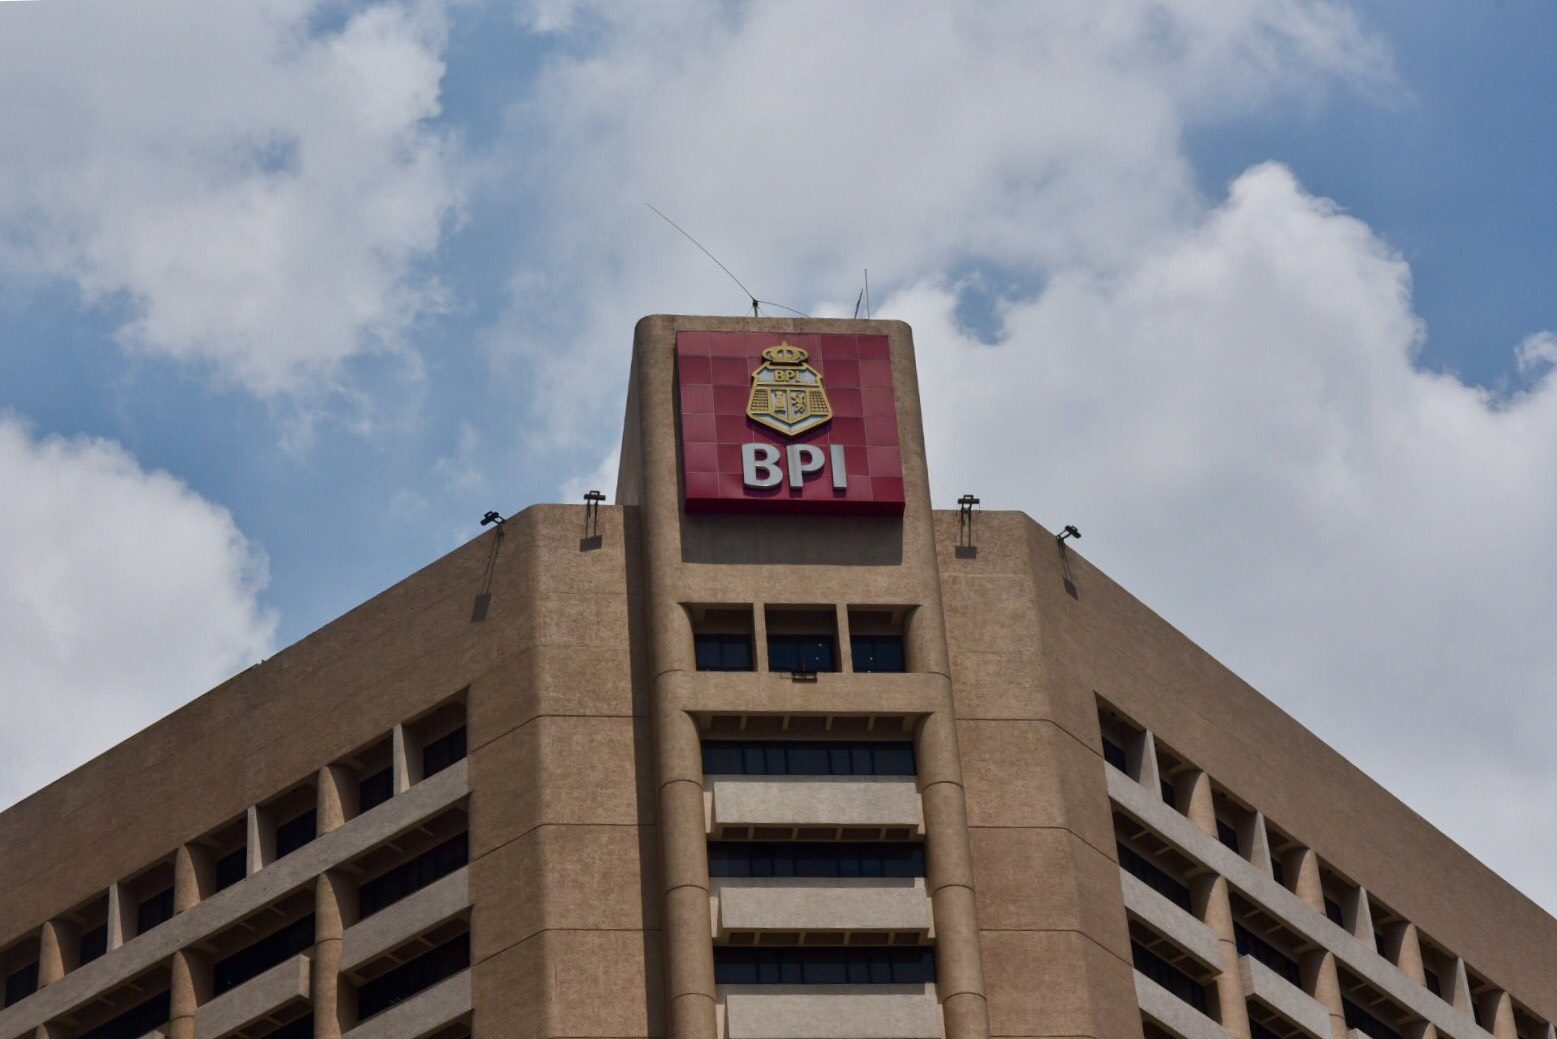 BPI clients frustrated over service concerns, money woes due to glitch